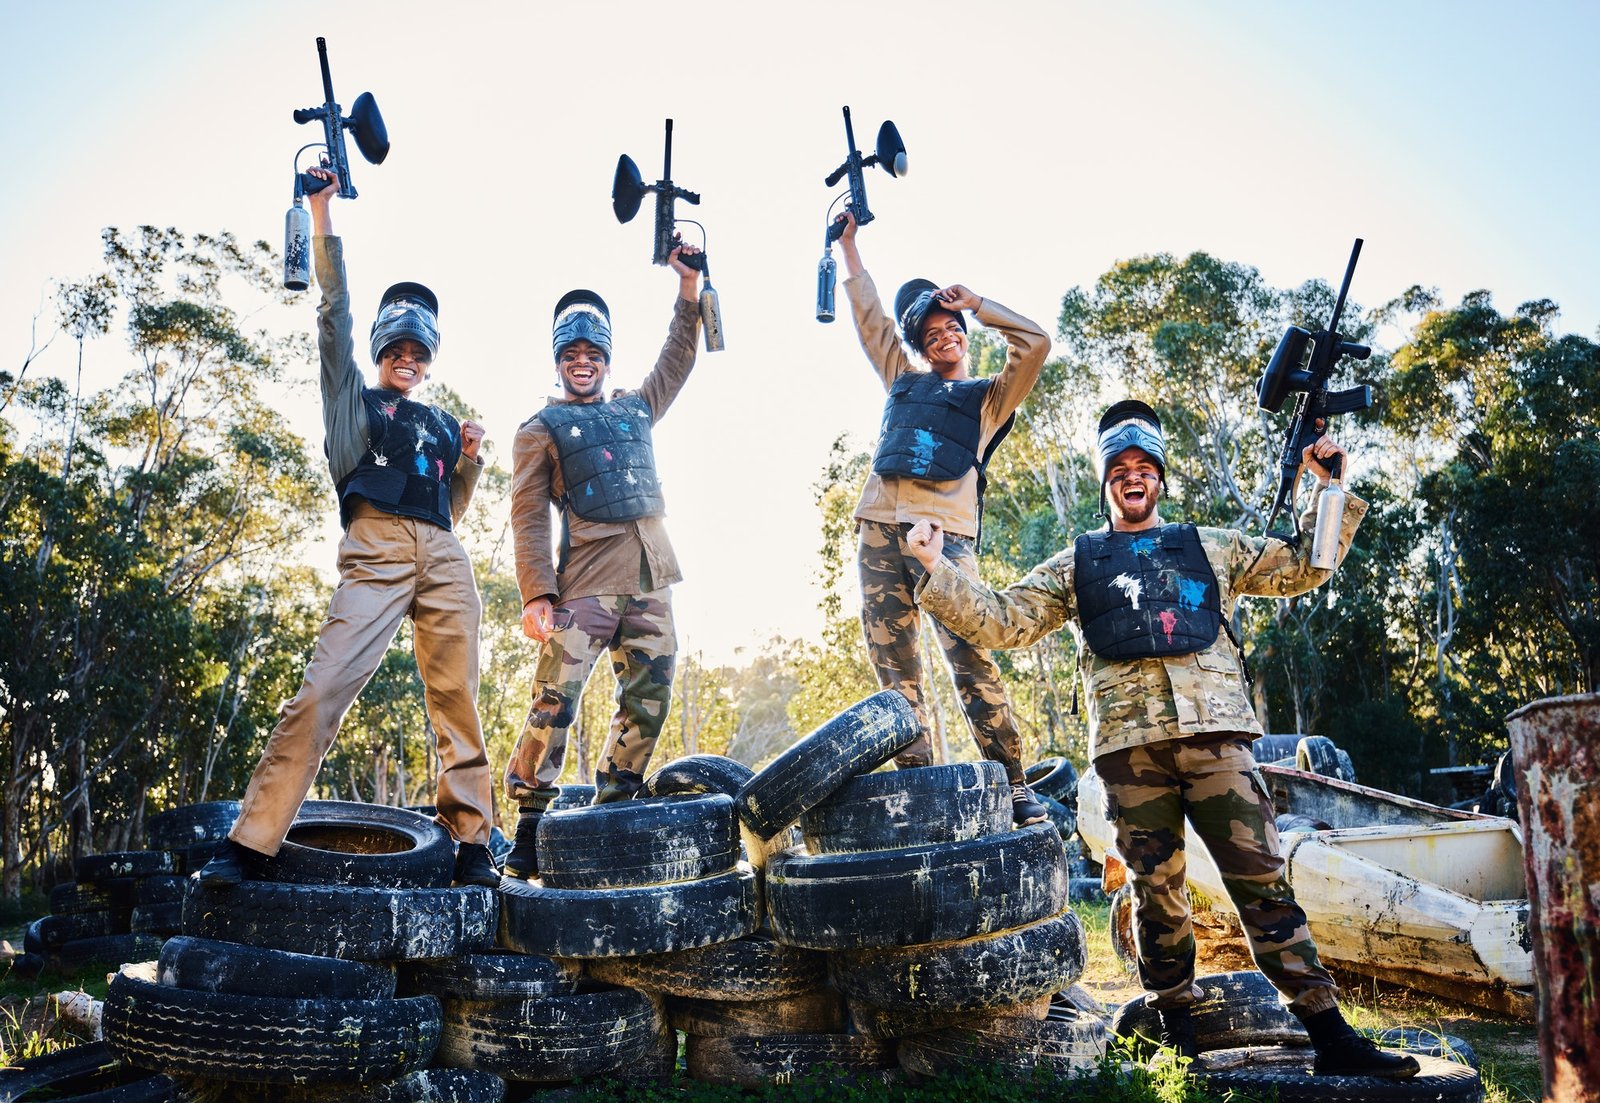 Team, paintball and portrait in celebration for winning, victory or achievement standing on tires t